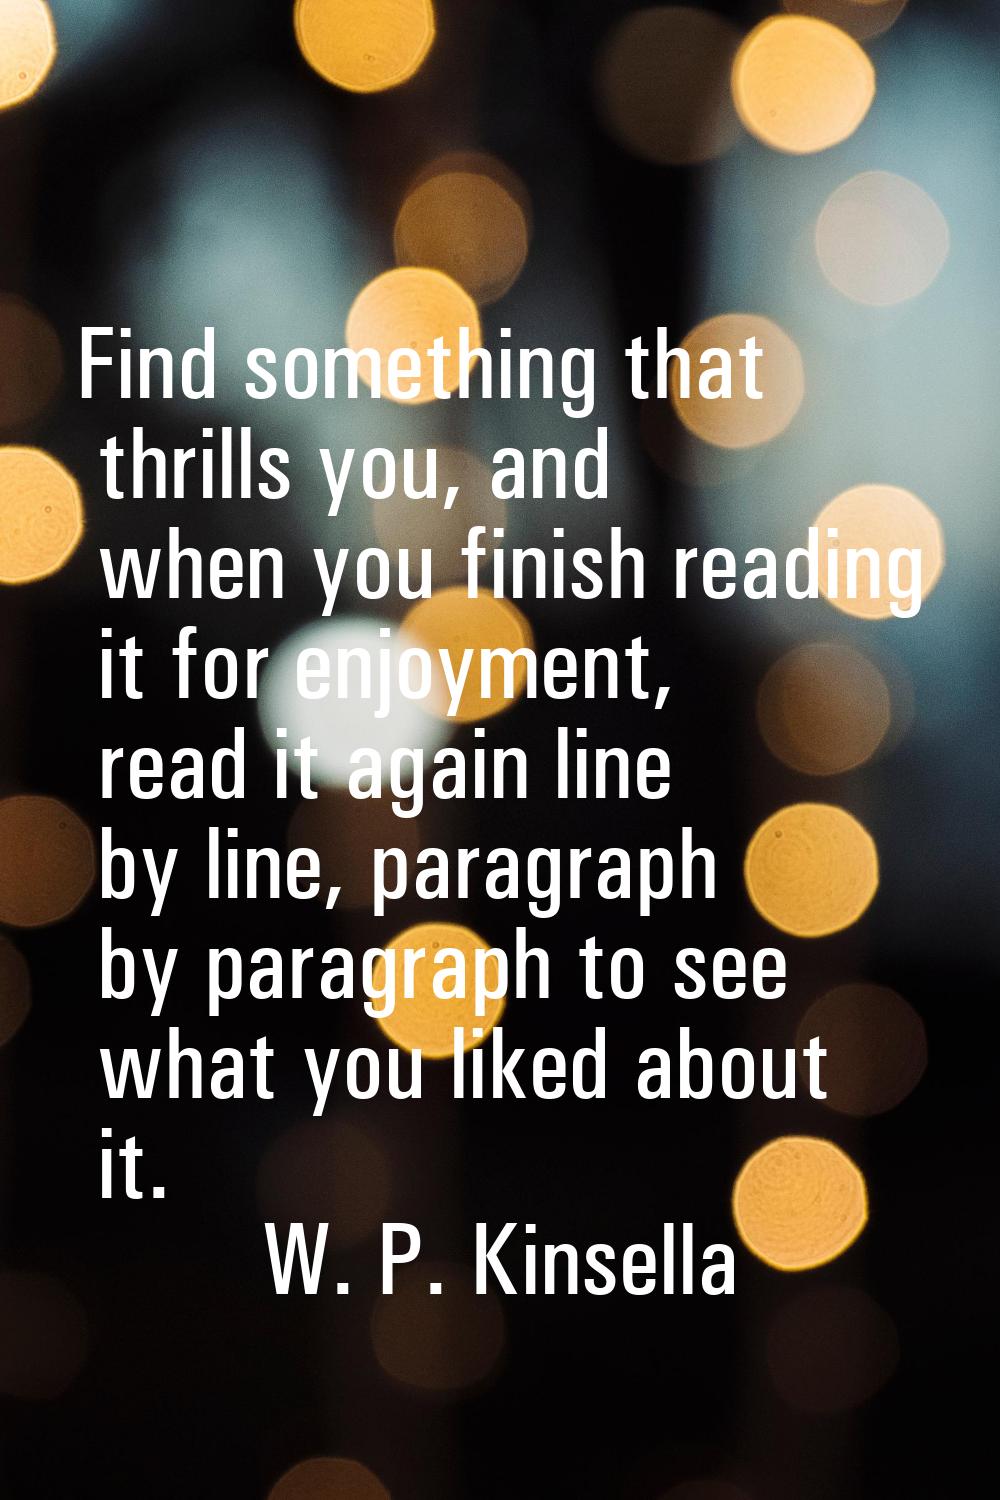 Find something that thrills you, and when you finish reading it for enjoyment, read it again line b